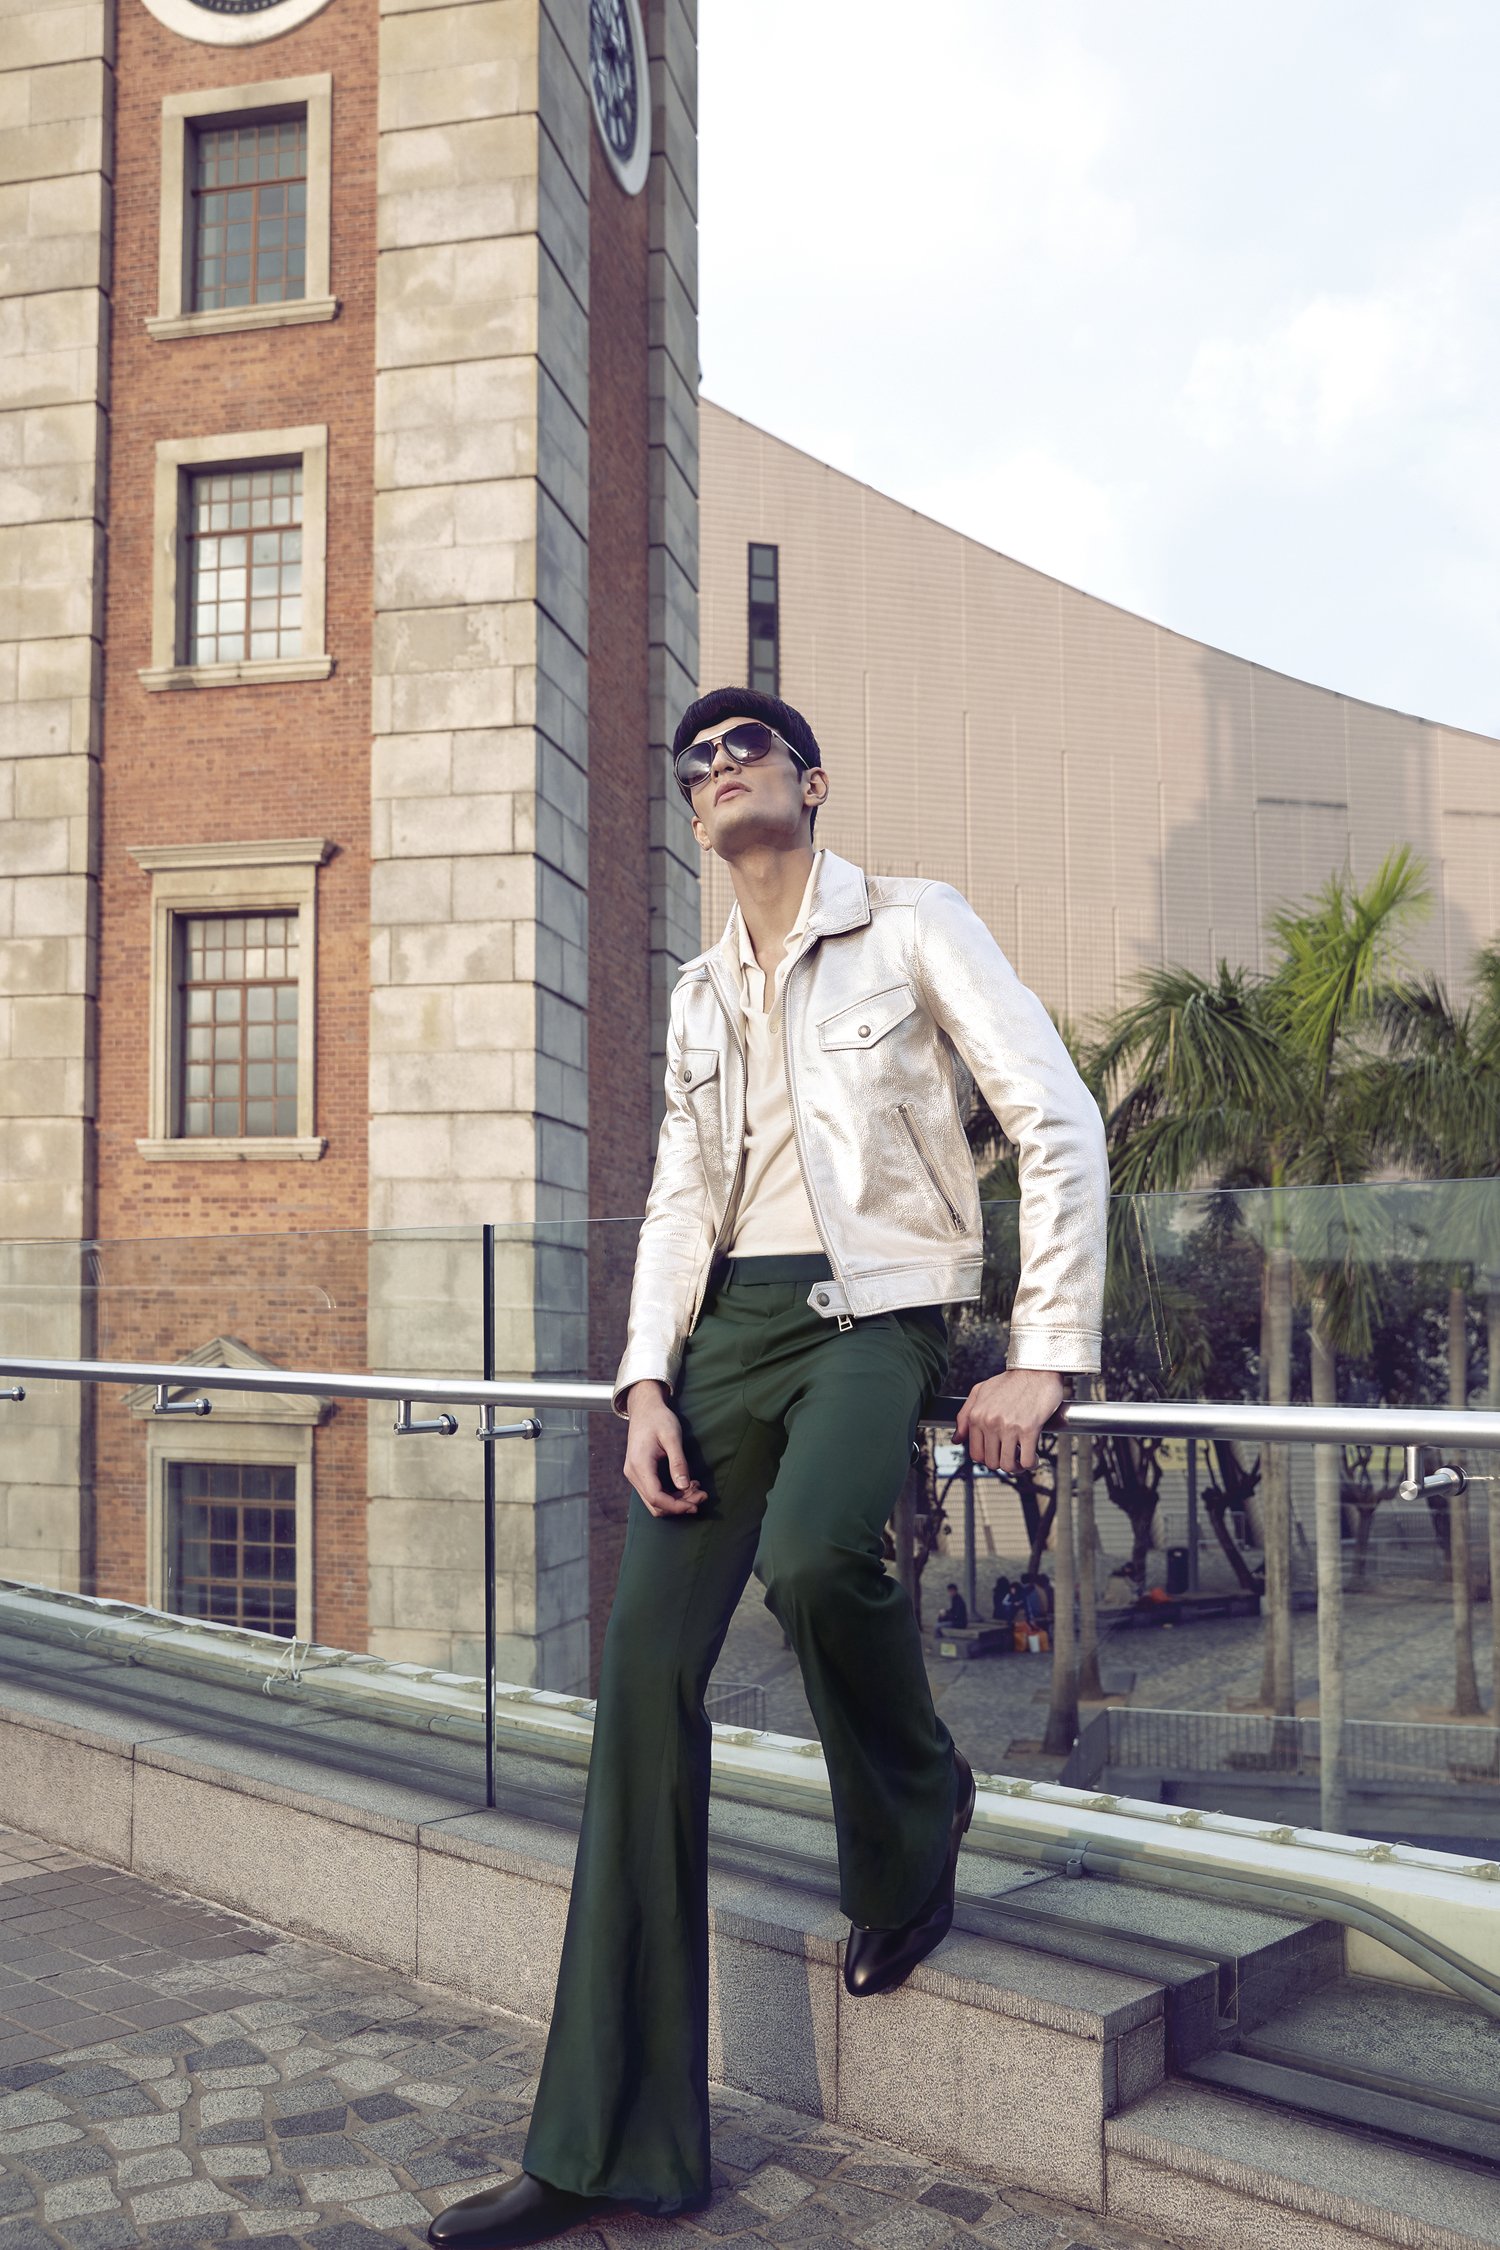 Fashion shoot: channel your inner Bruce Lee | South China Morning Post